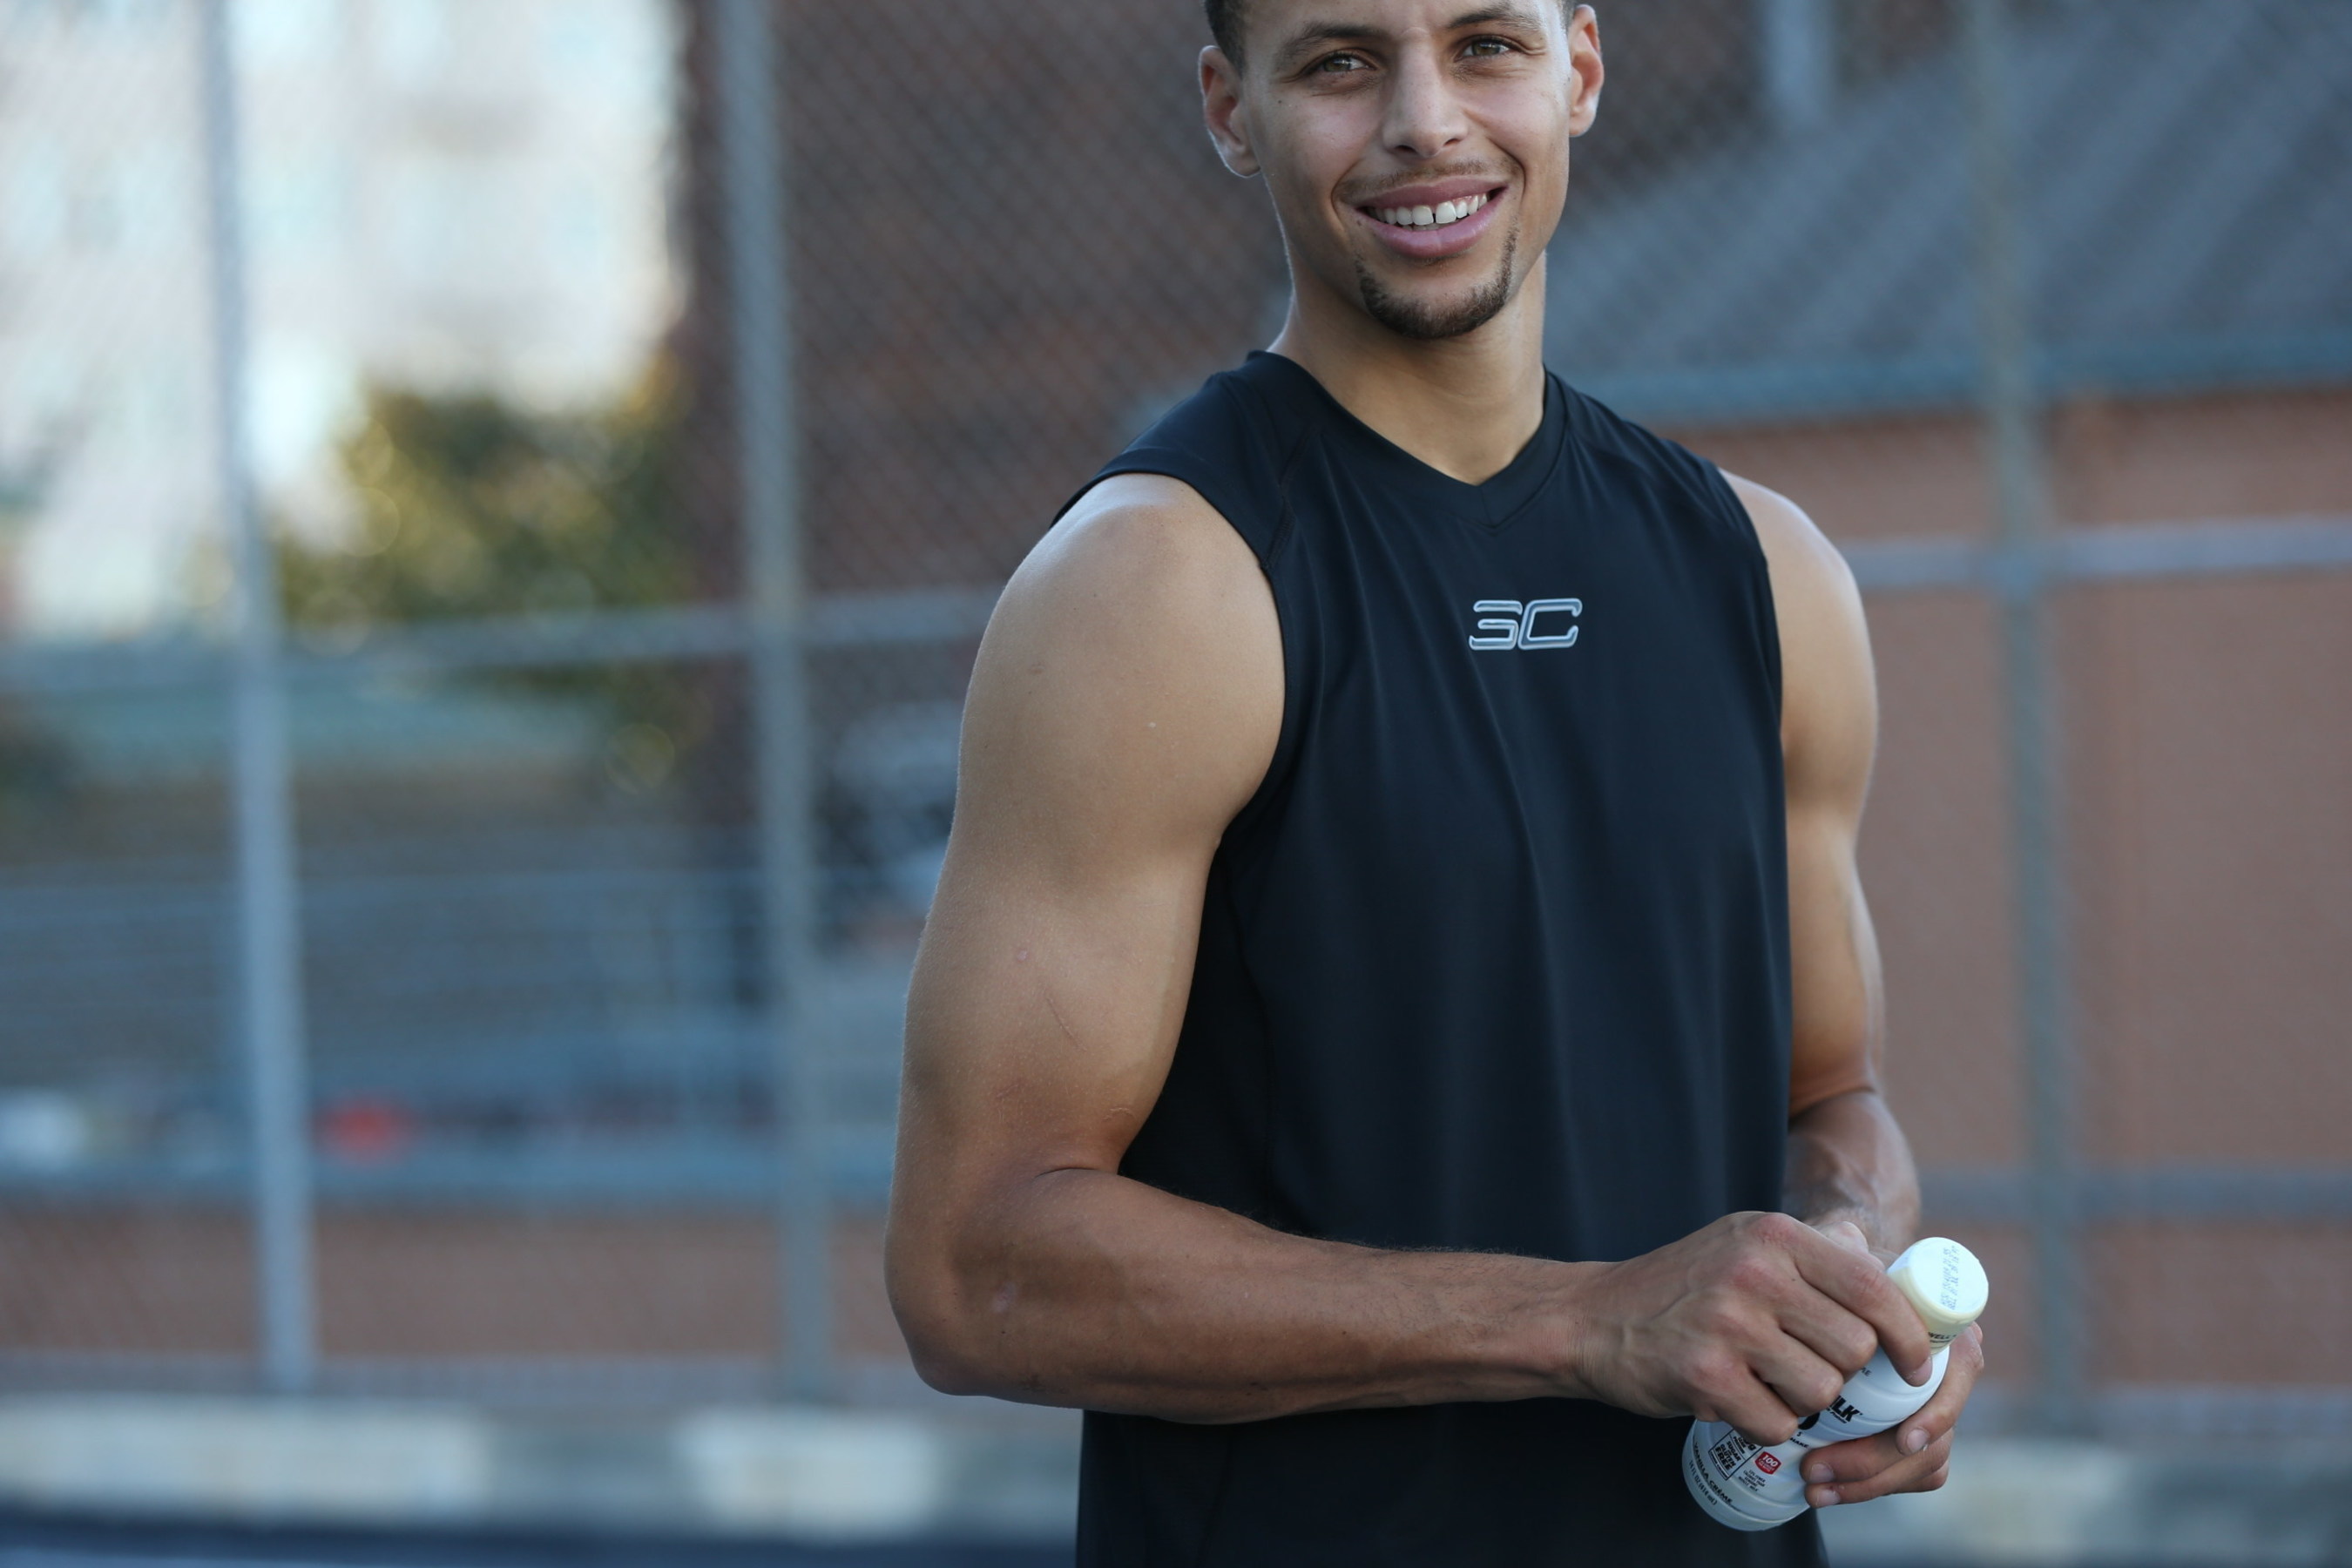 The Muscle Milk® Brand Re-Signs Stephen Curry to Long-Term Deal